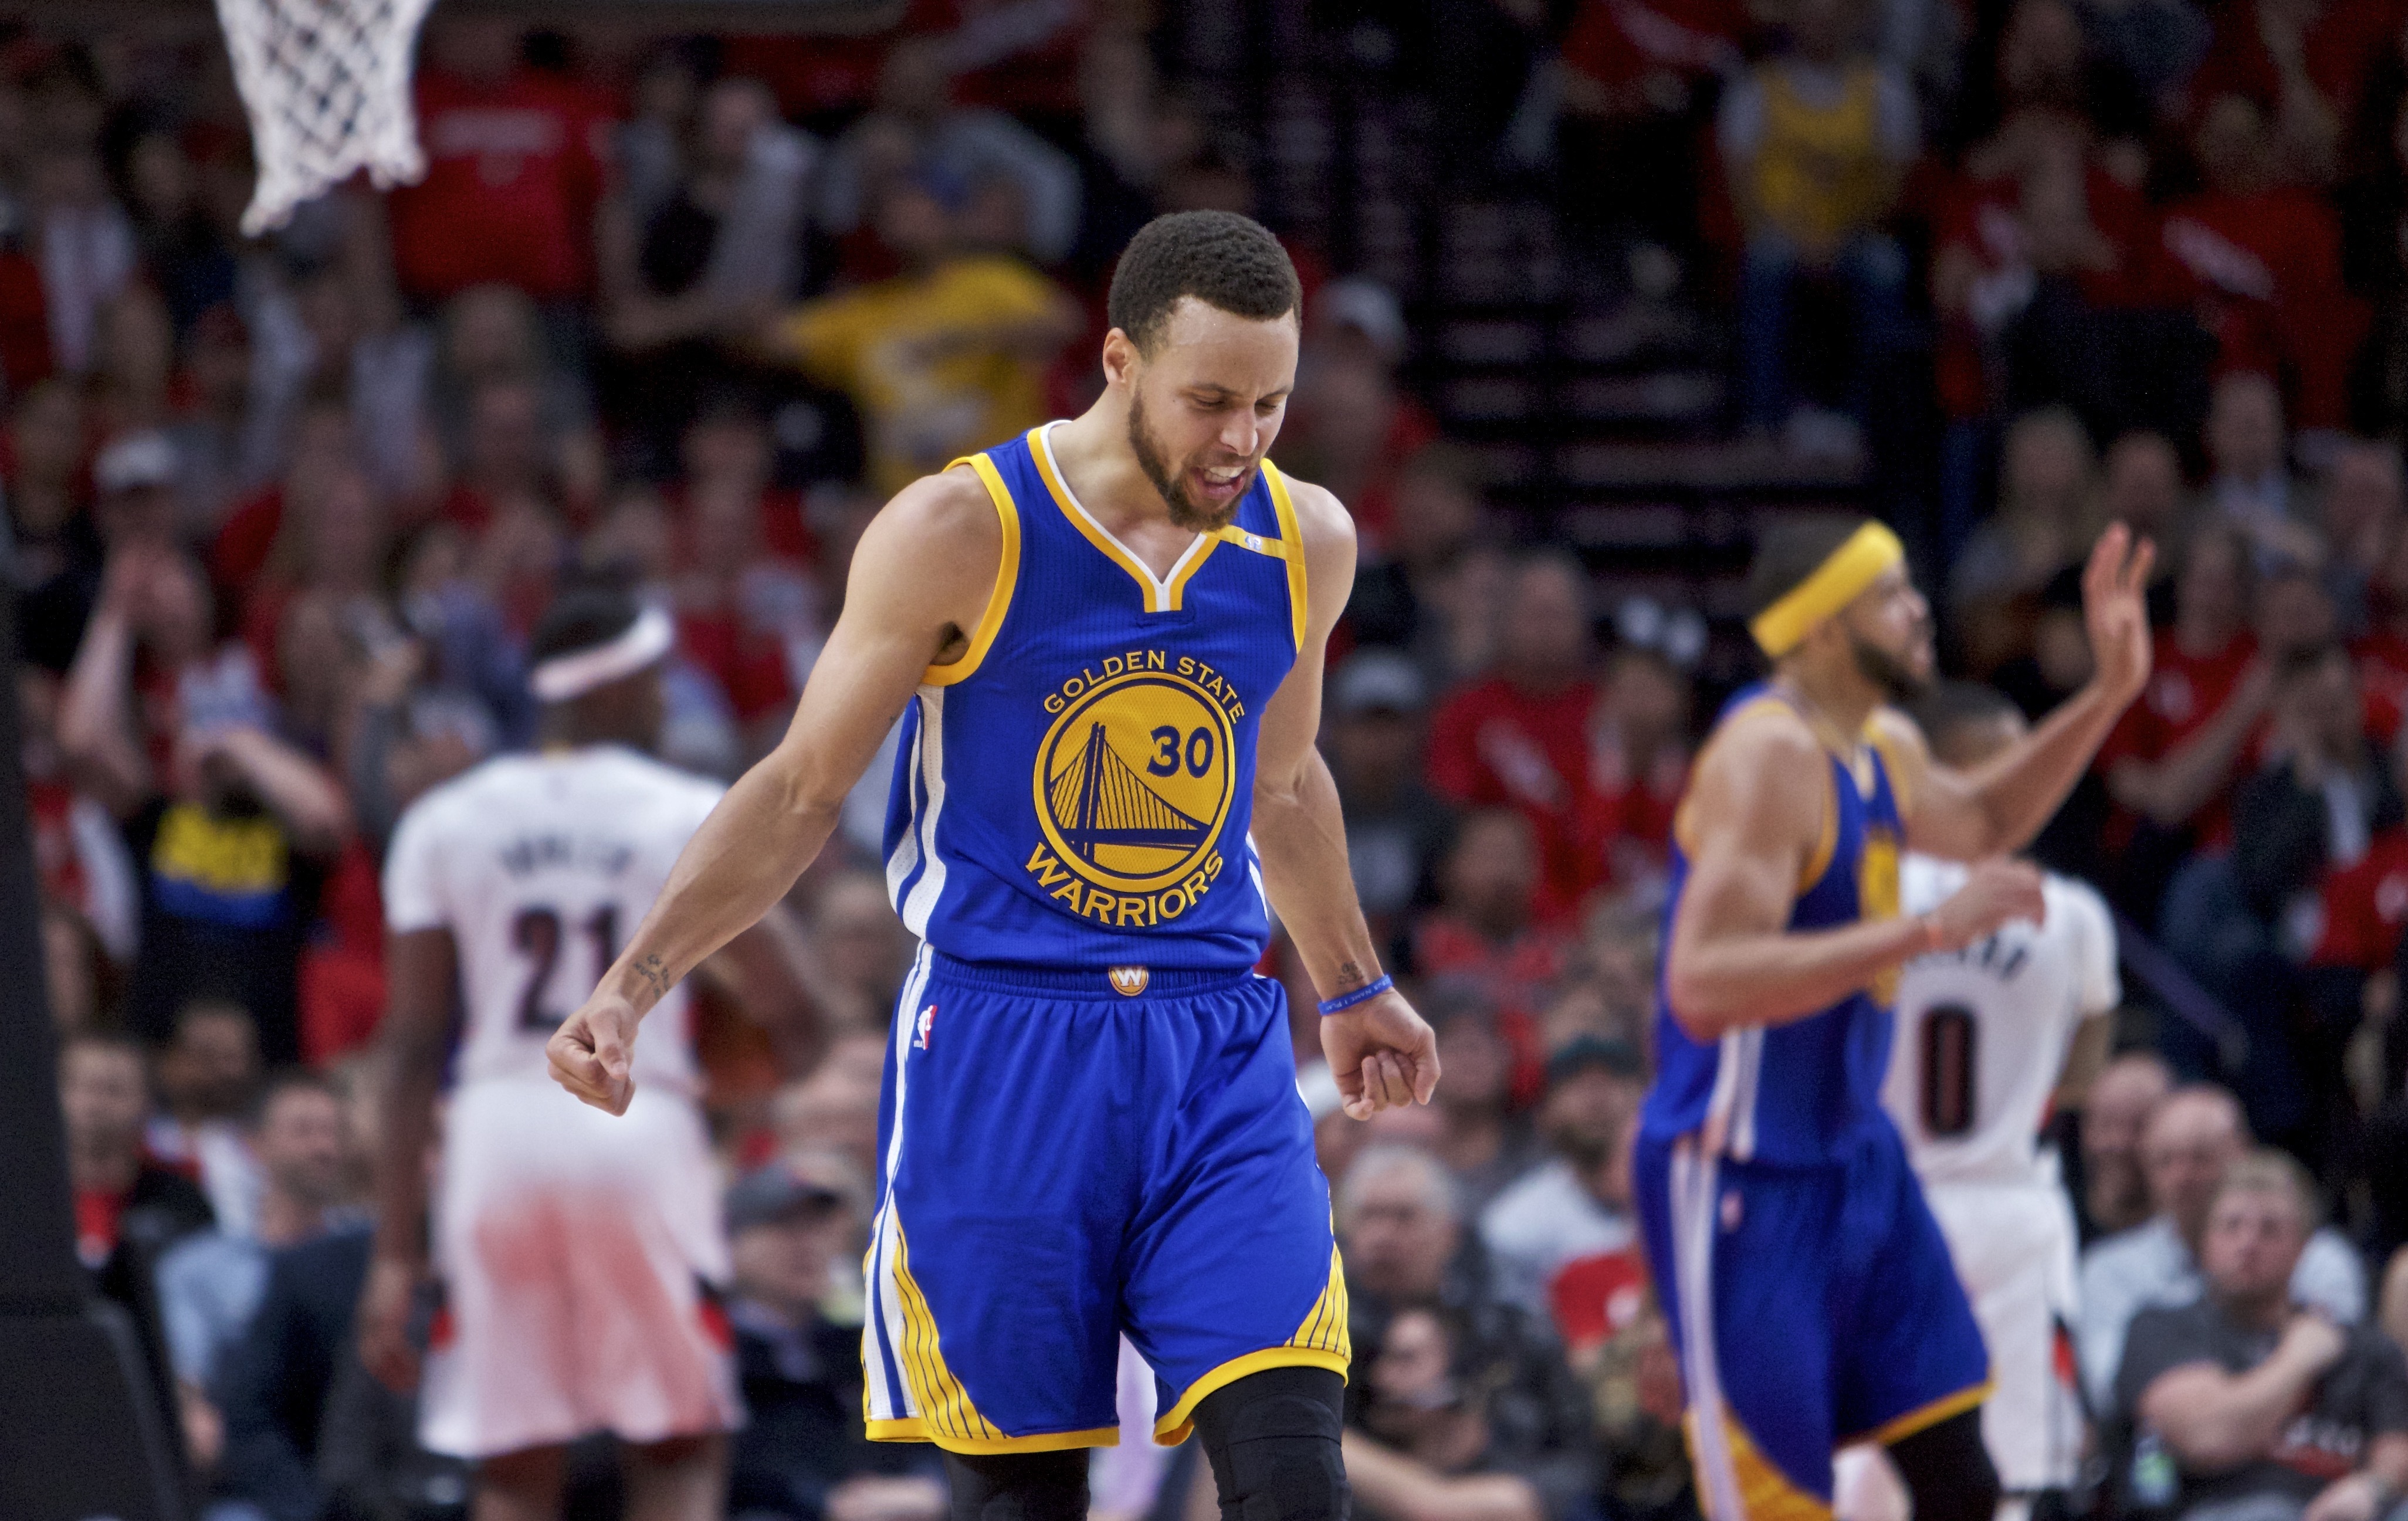 Golden State Warriors guard Stephen Curry reacts after making a basket against the Portland Trail Blazers during the second half of Game 3 of an NBA basketball first-round playoff series Saturday, April 22, 2017, in Portland, Ore. (AP Photo/Craig Mitchelldyer)